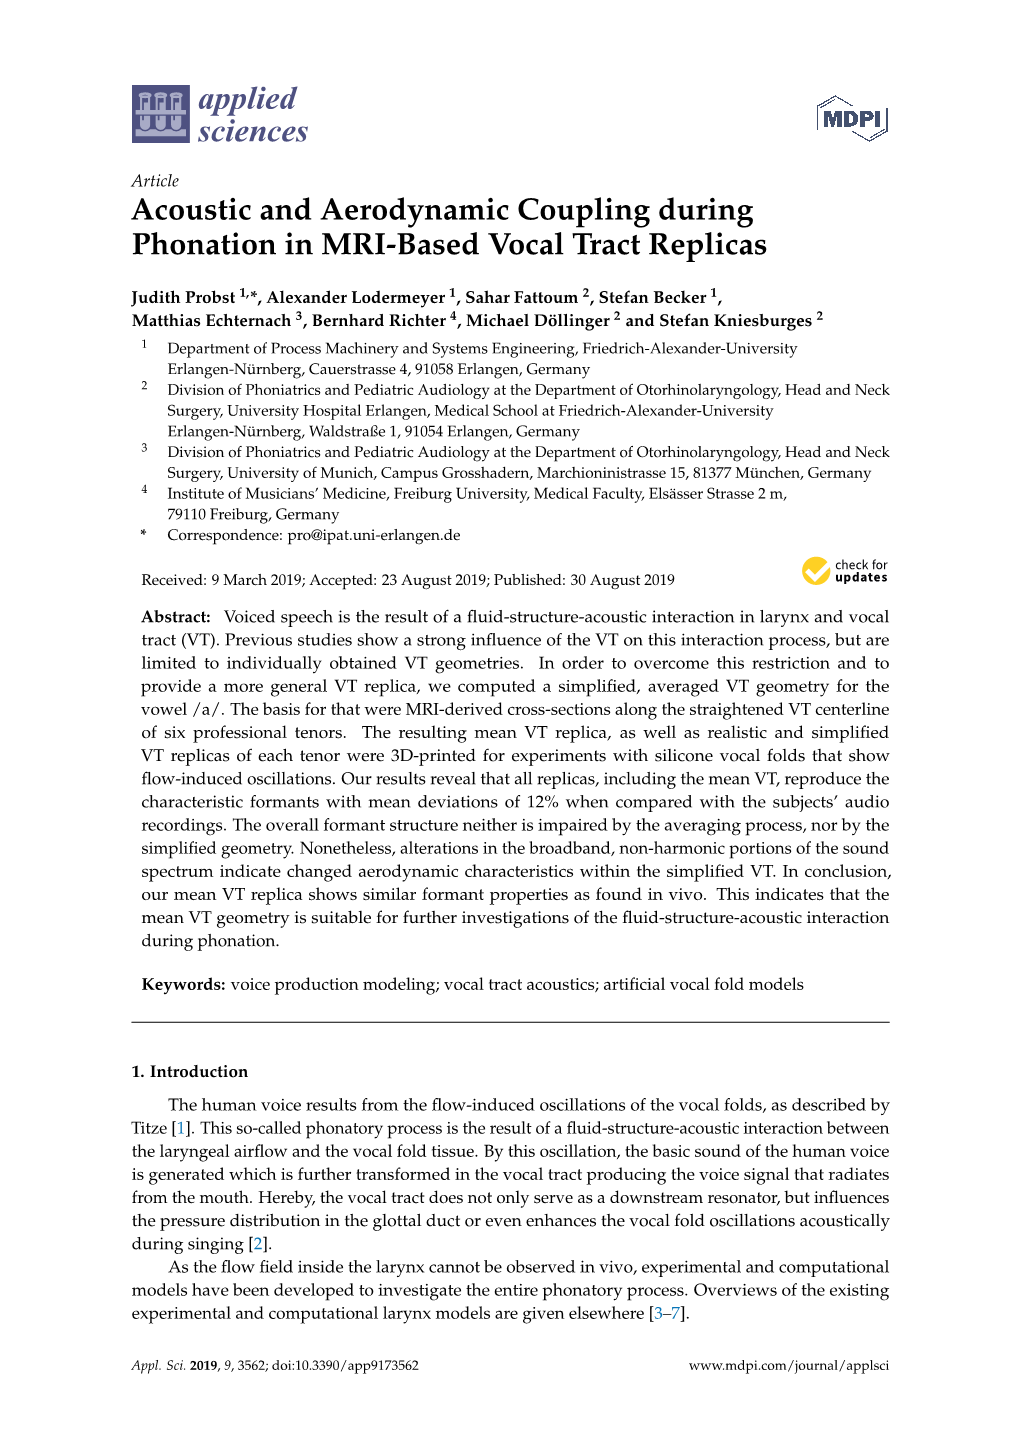 Acoustic and Aerodynamic Coupling During Phonation in MRI-Based Vocal Tract Replicas